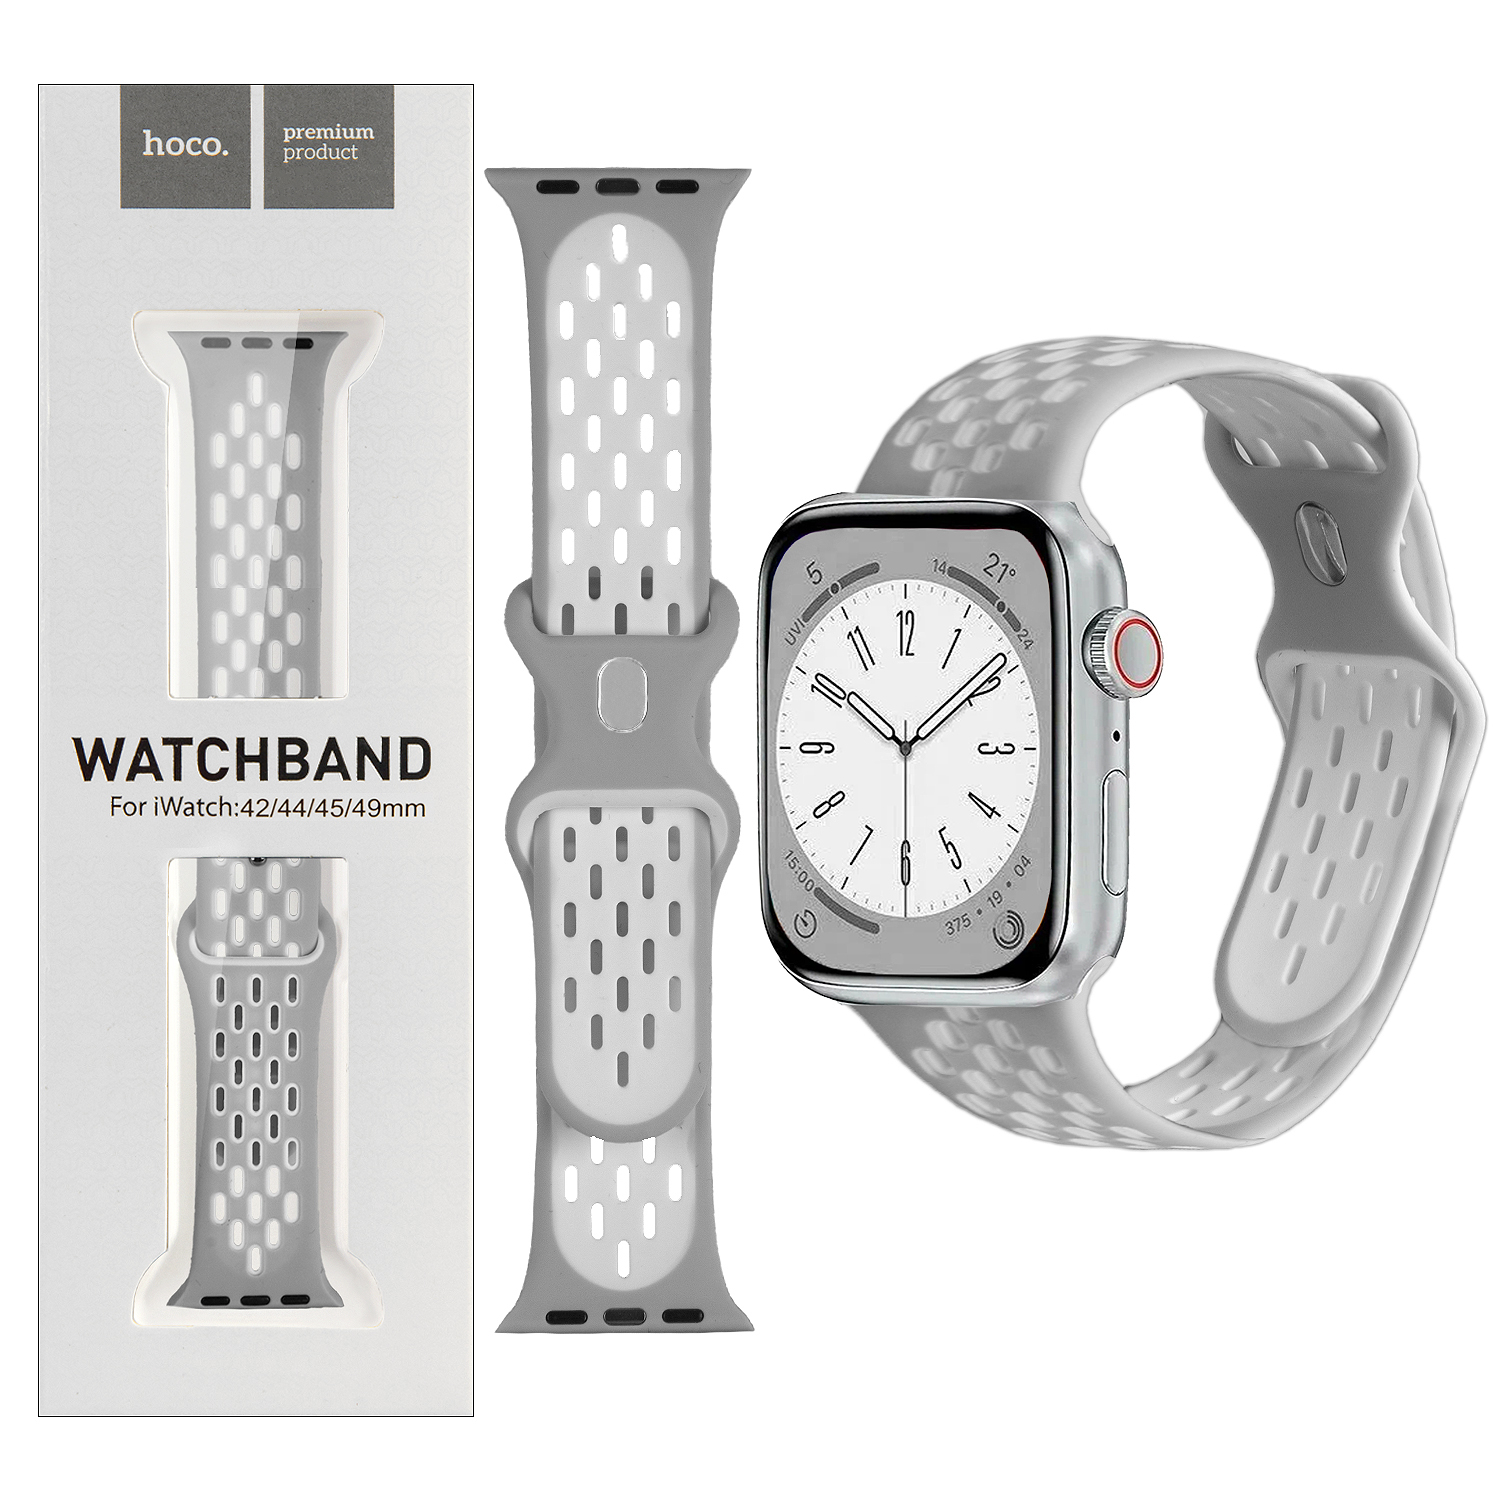 Ремешок для Apl watch 42/44/45/49mm Watchband WA19 pattern two-color silicone silver white HOCO